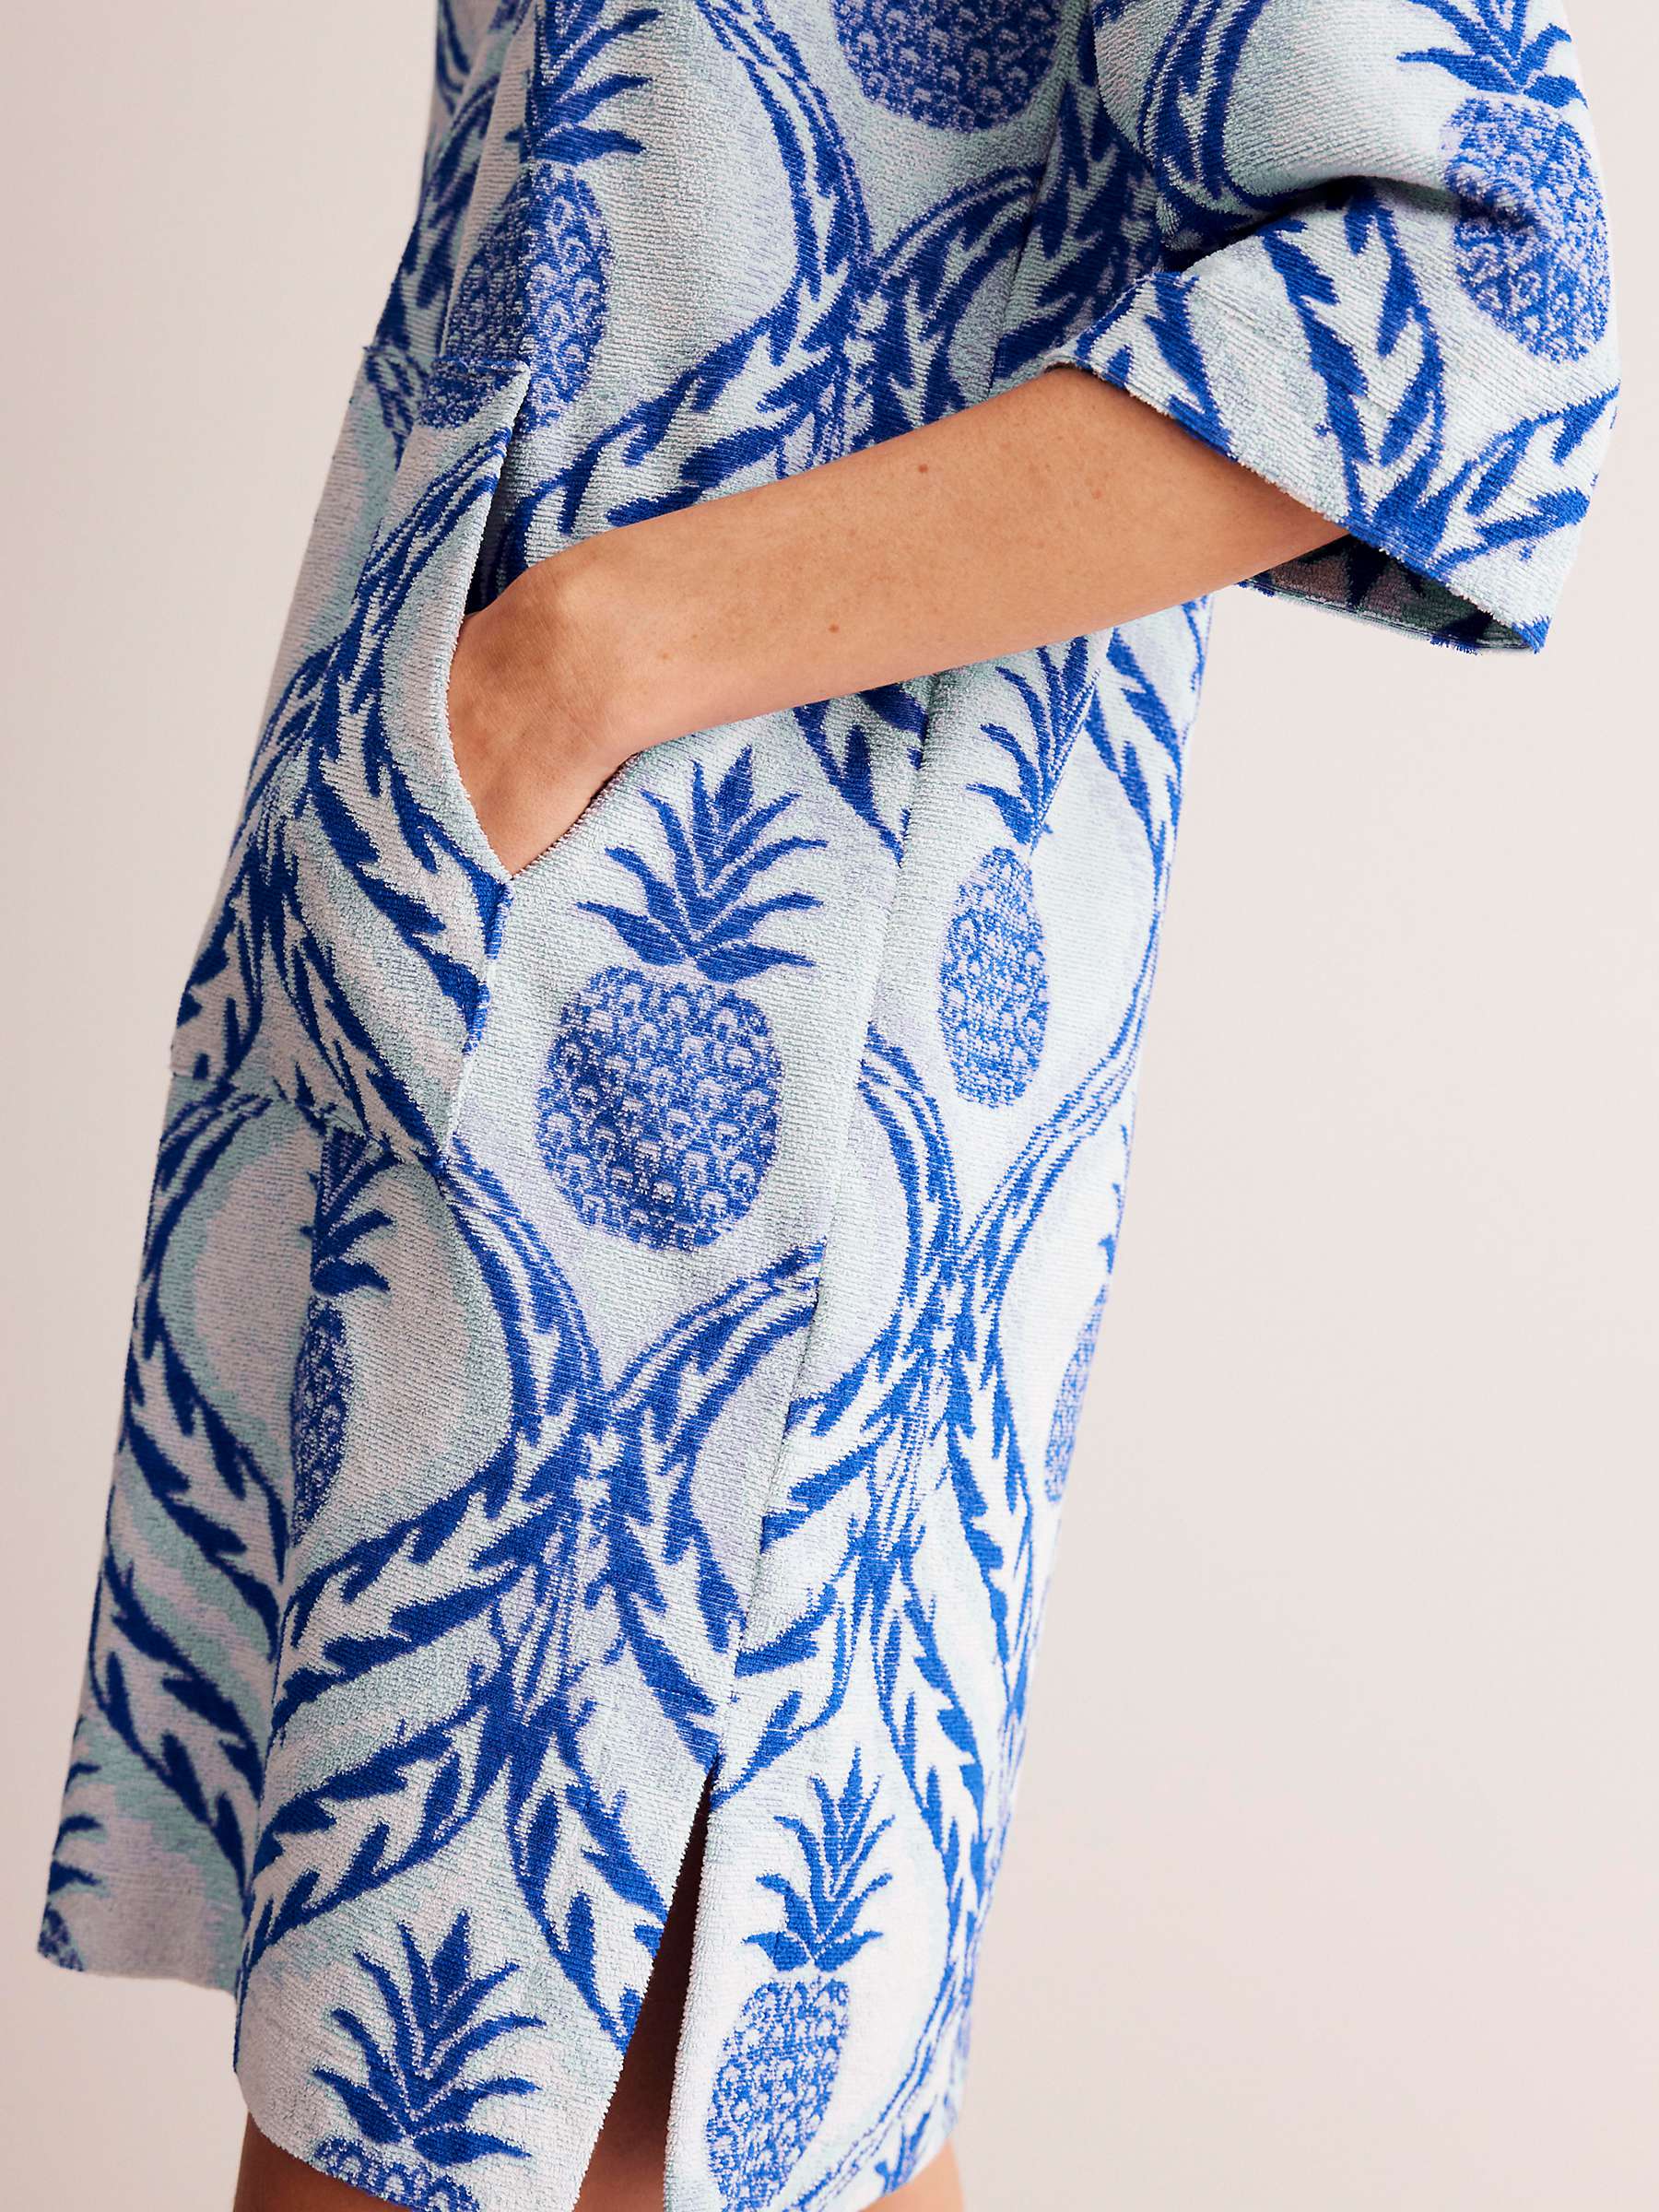 Buy Boden Pineapples Hooded Towelling Dress, Blue Online at johnlewis.com